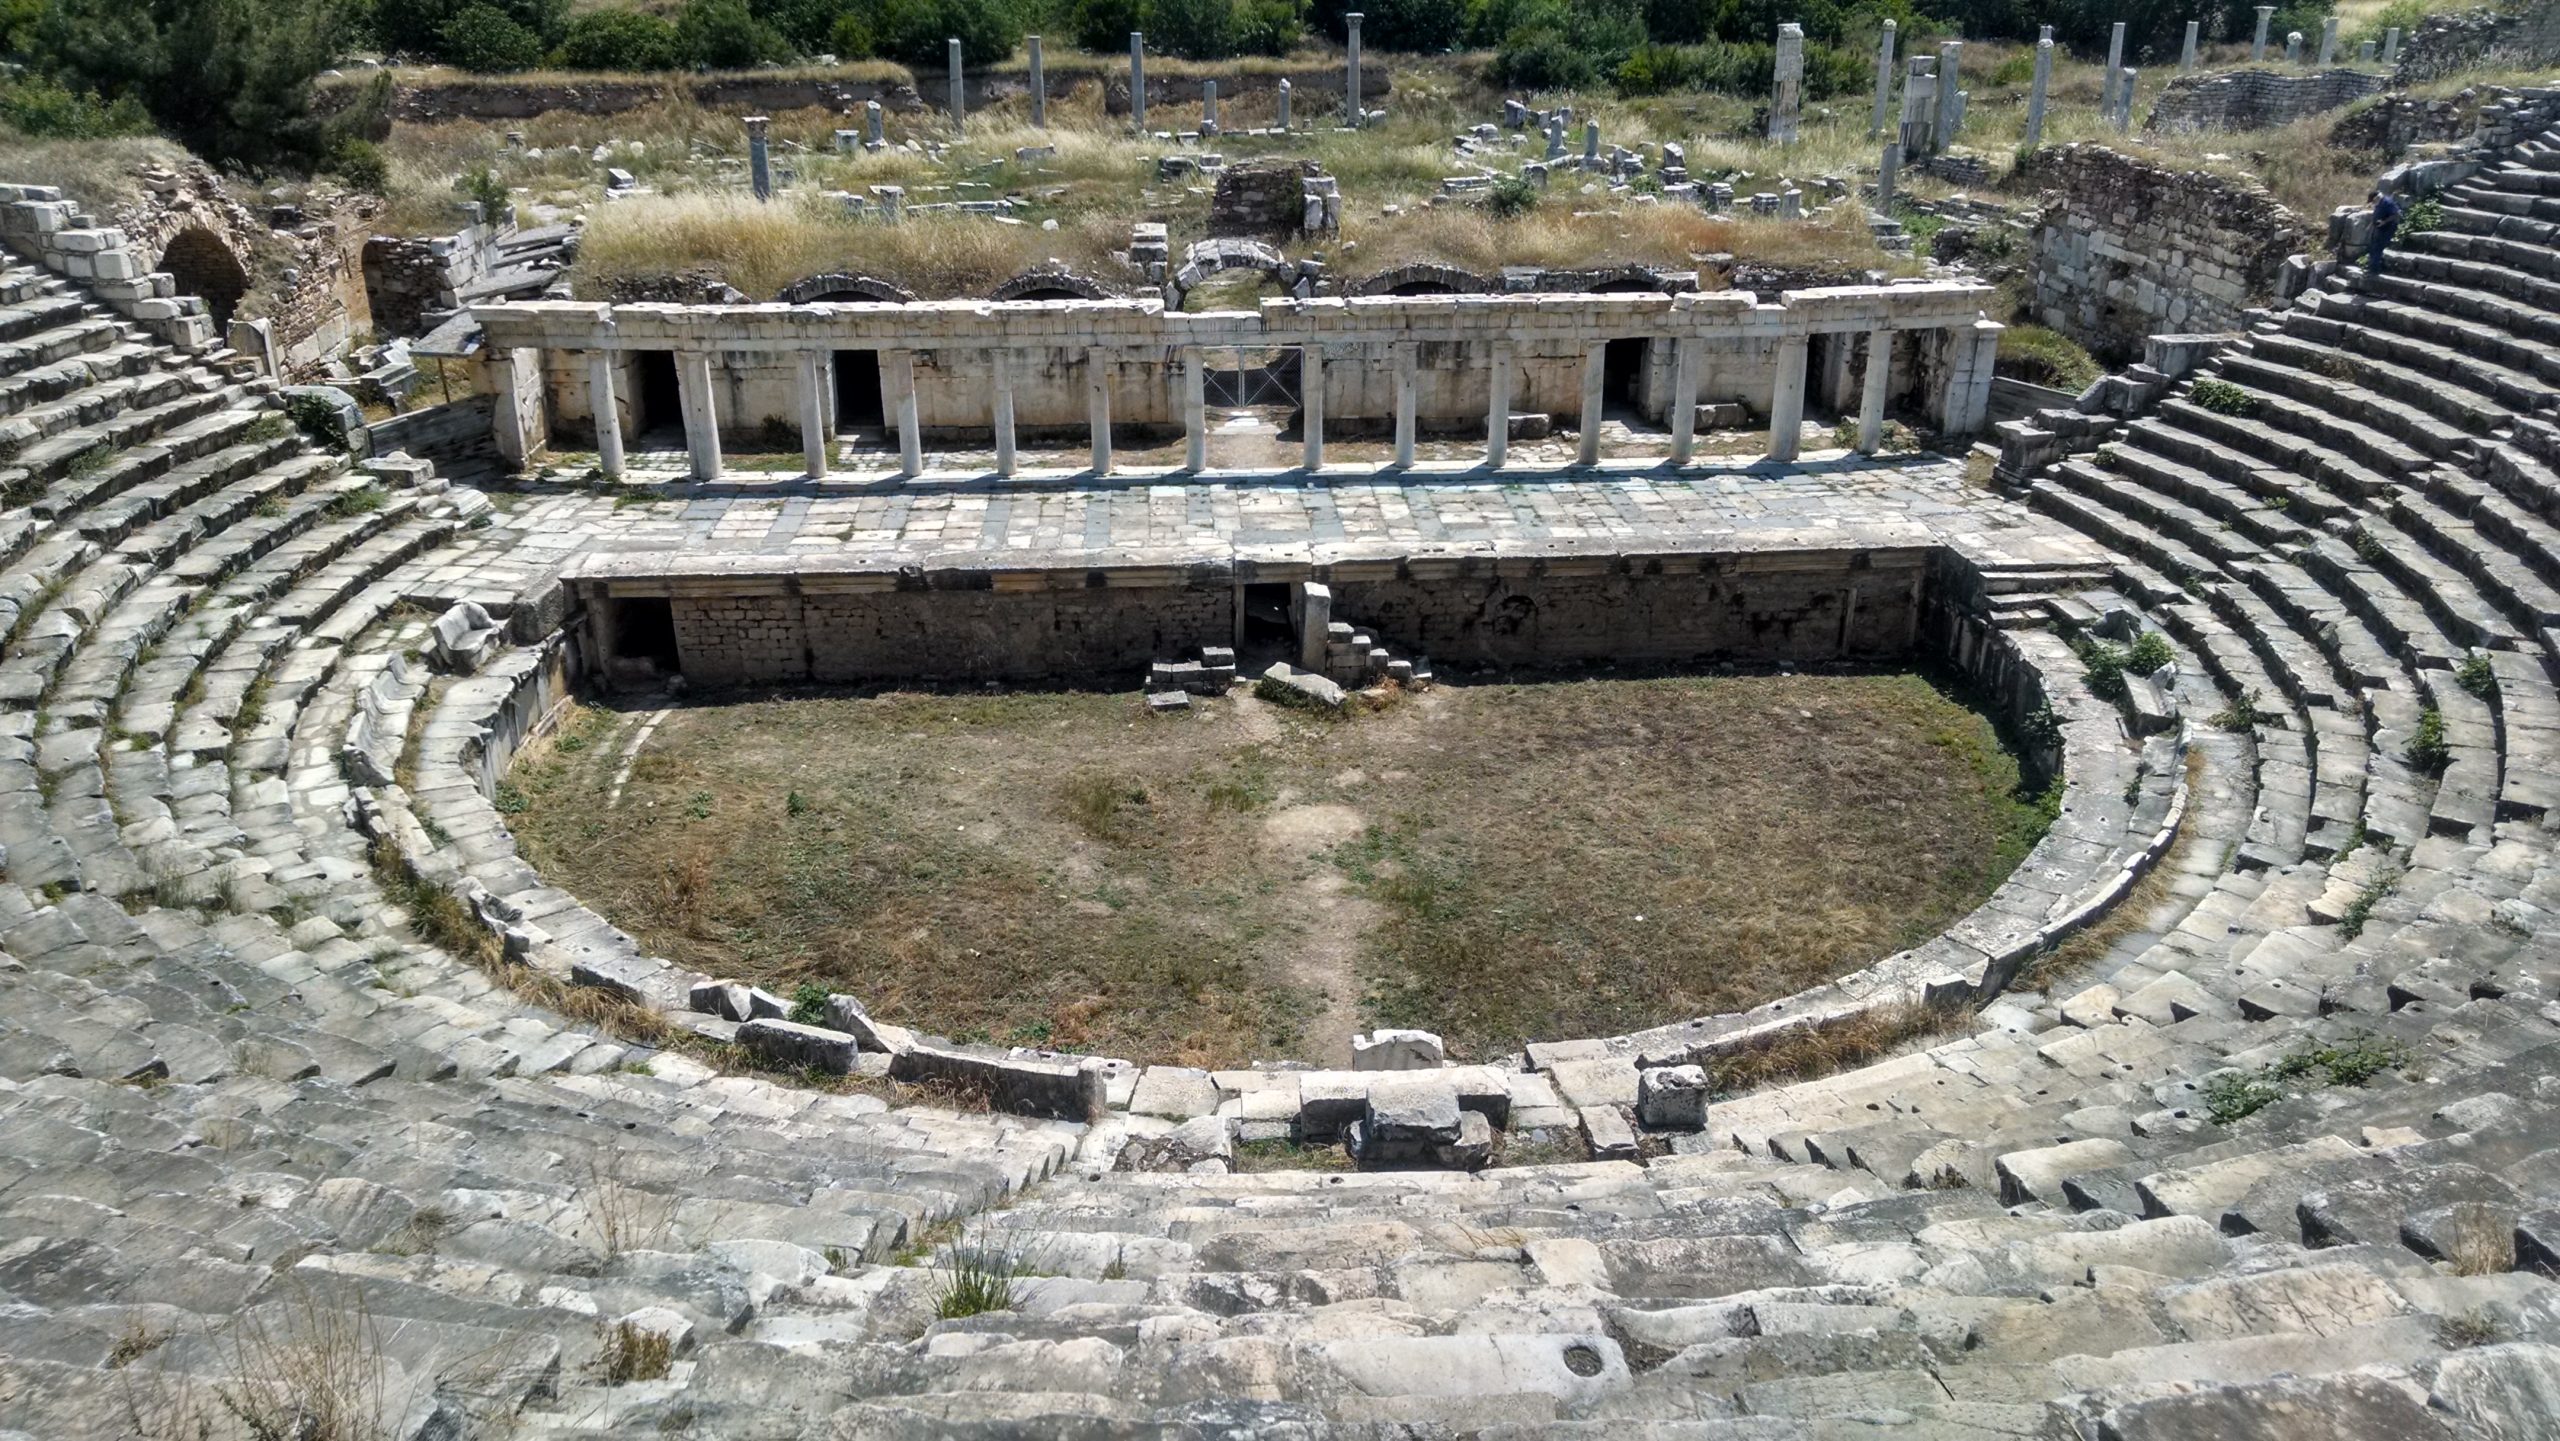 Stone amphitheatre, image taken from upper seats. Curved rows of stone benches descend to a semi-circular grass orchestra, backed by a raised stone stage. The lower story of an originally three story scaenae is preserved. It is aedicular style, with 14 marble columns. Behind the scaenae the ruins of other columns and buildings at the site can be seen.